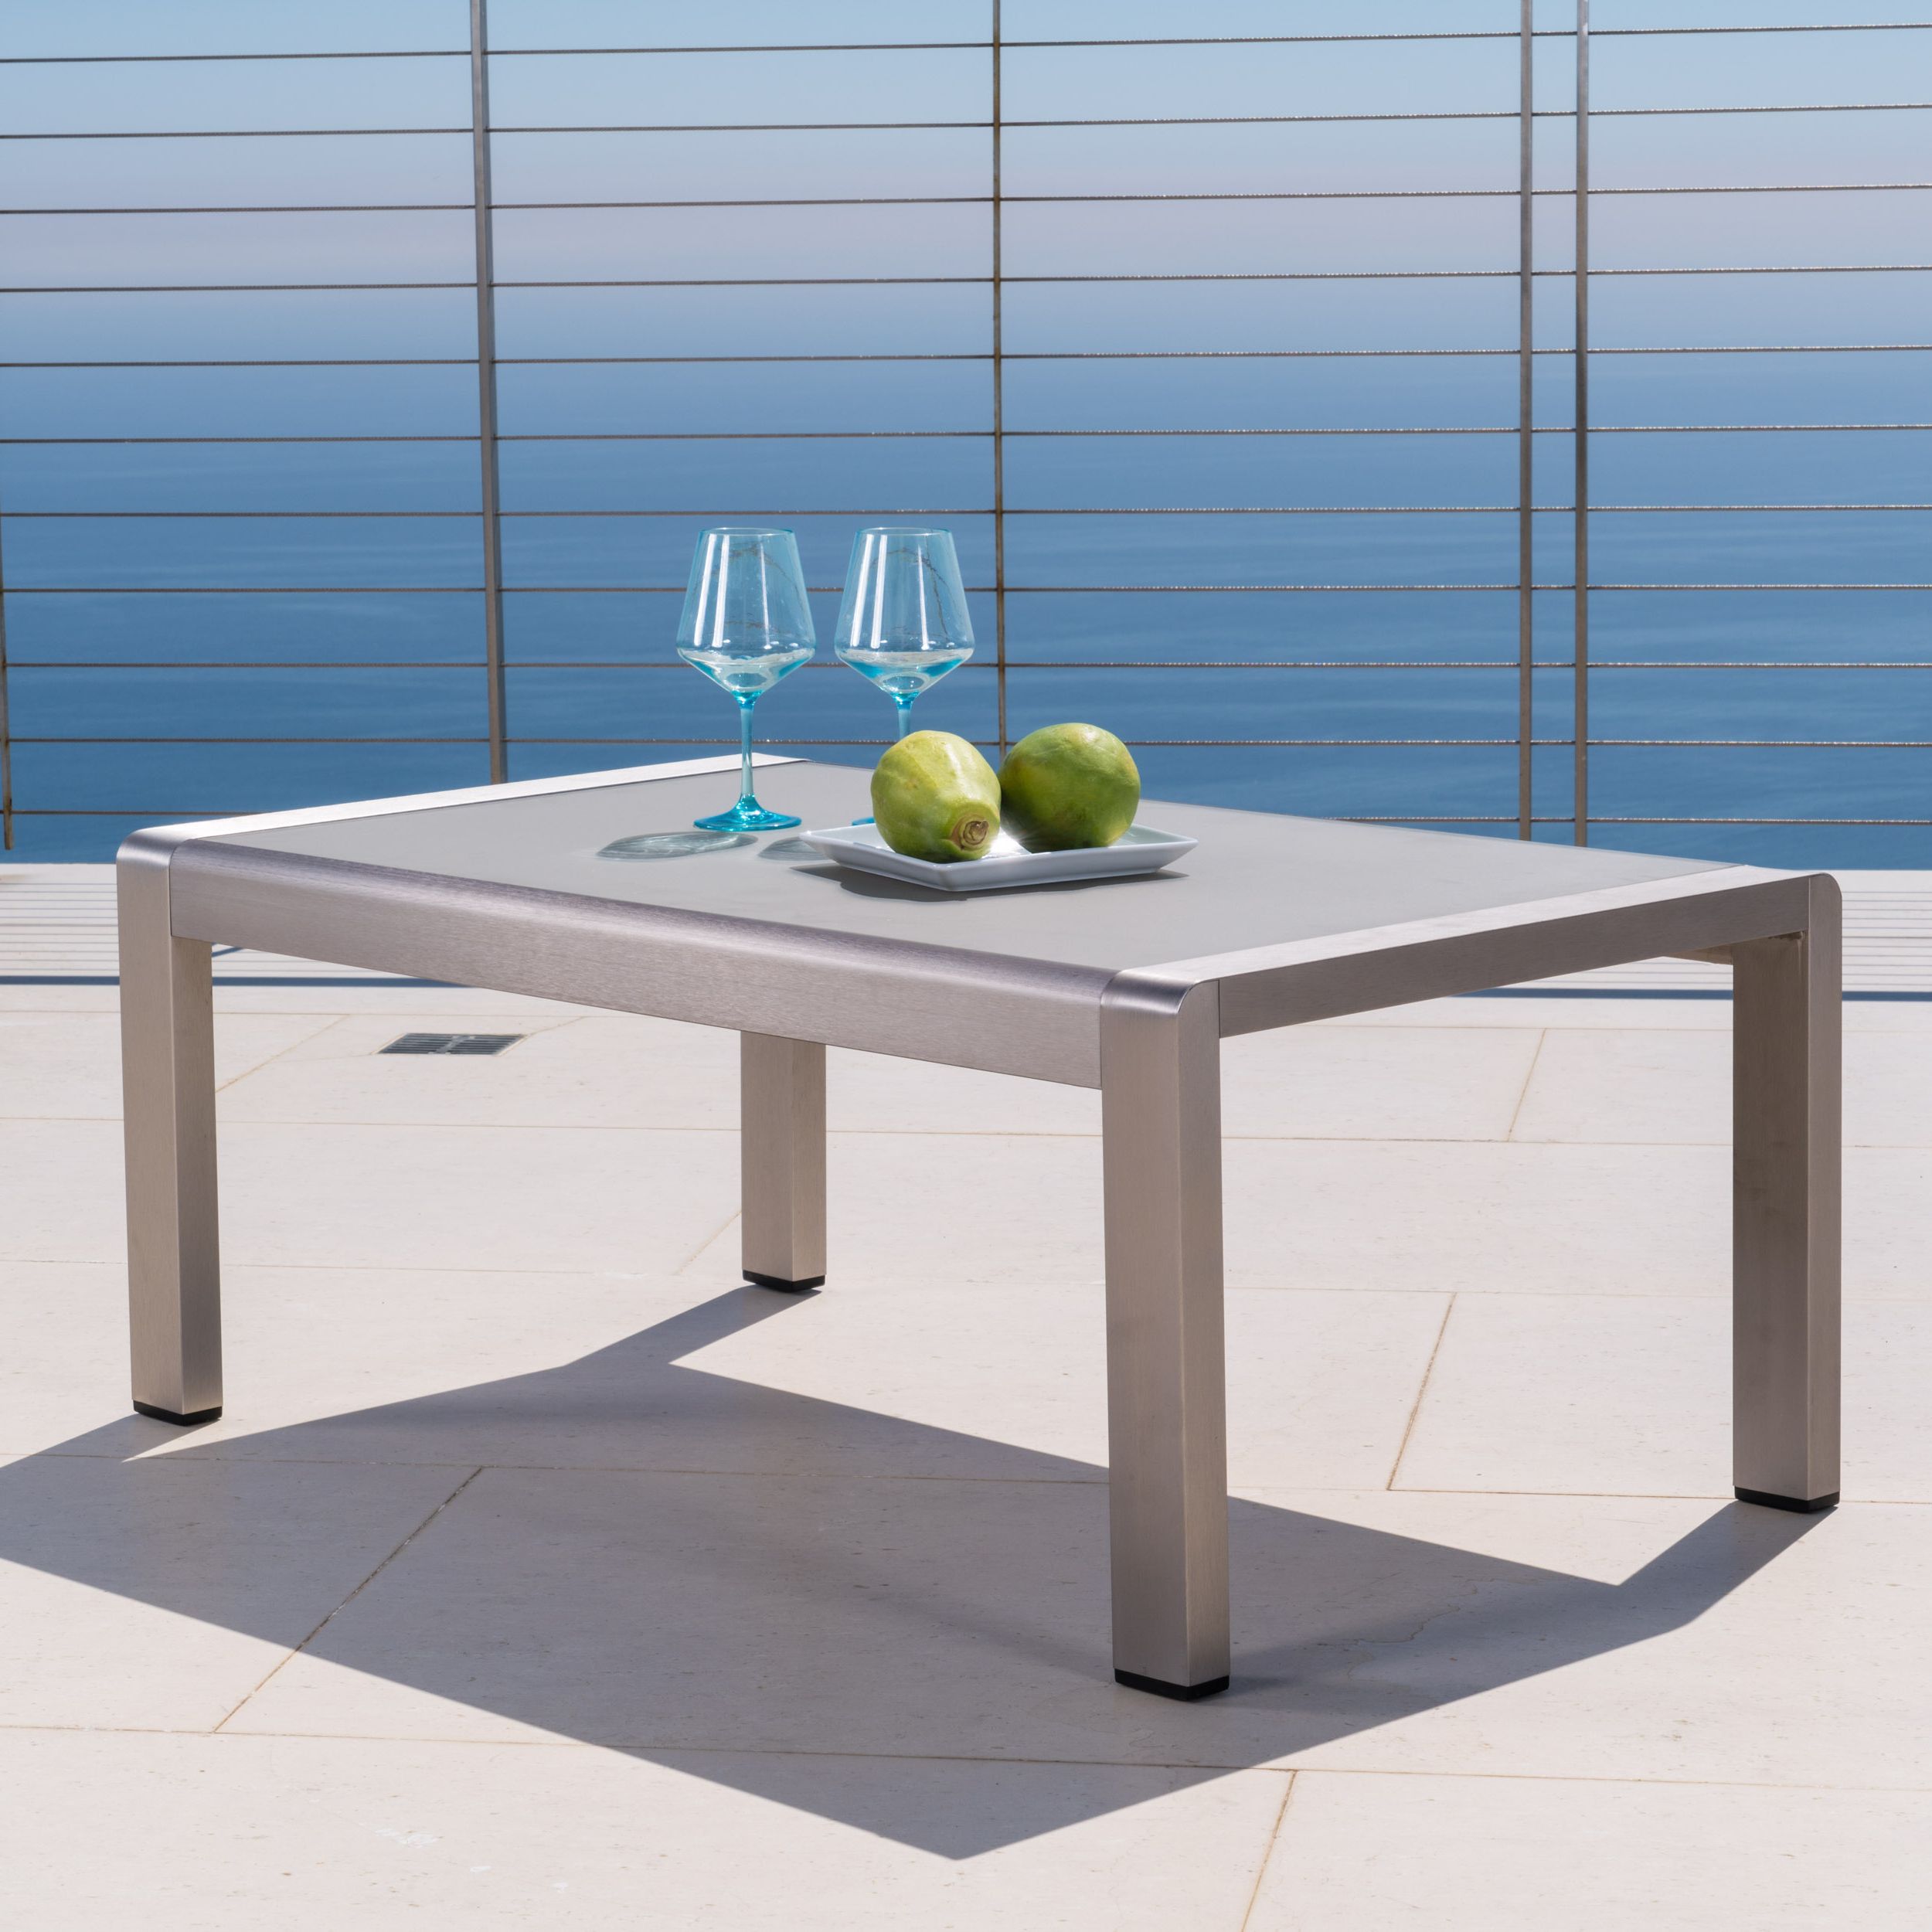 Famous Miller Outdoor Aluminum Coffee Table With Glass Top, Silver – Walmart Regarding Silver Coffee Tables (View 5 of 10)